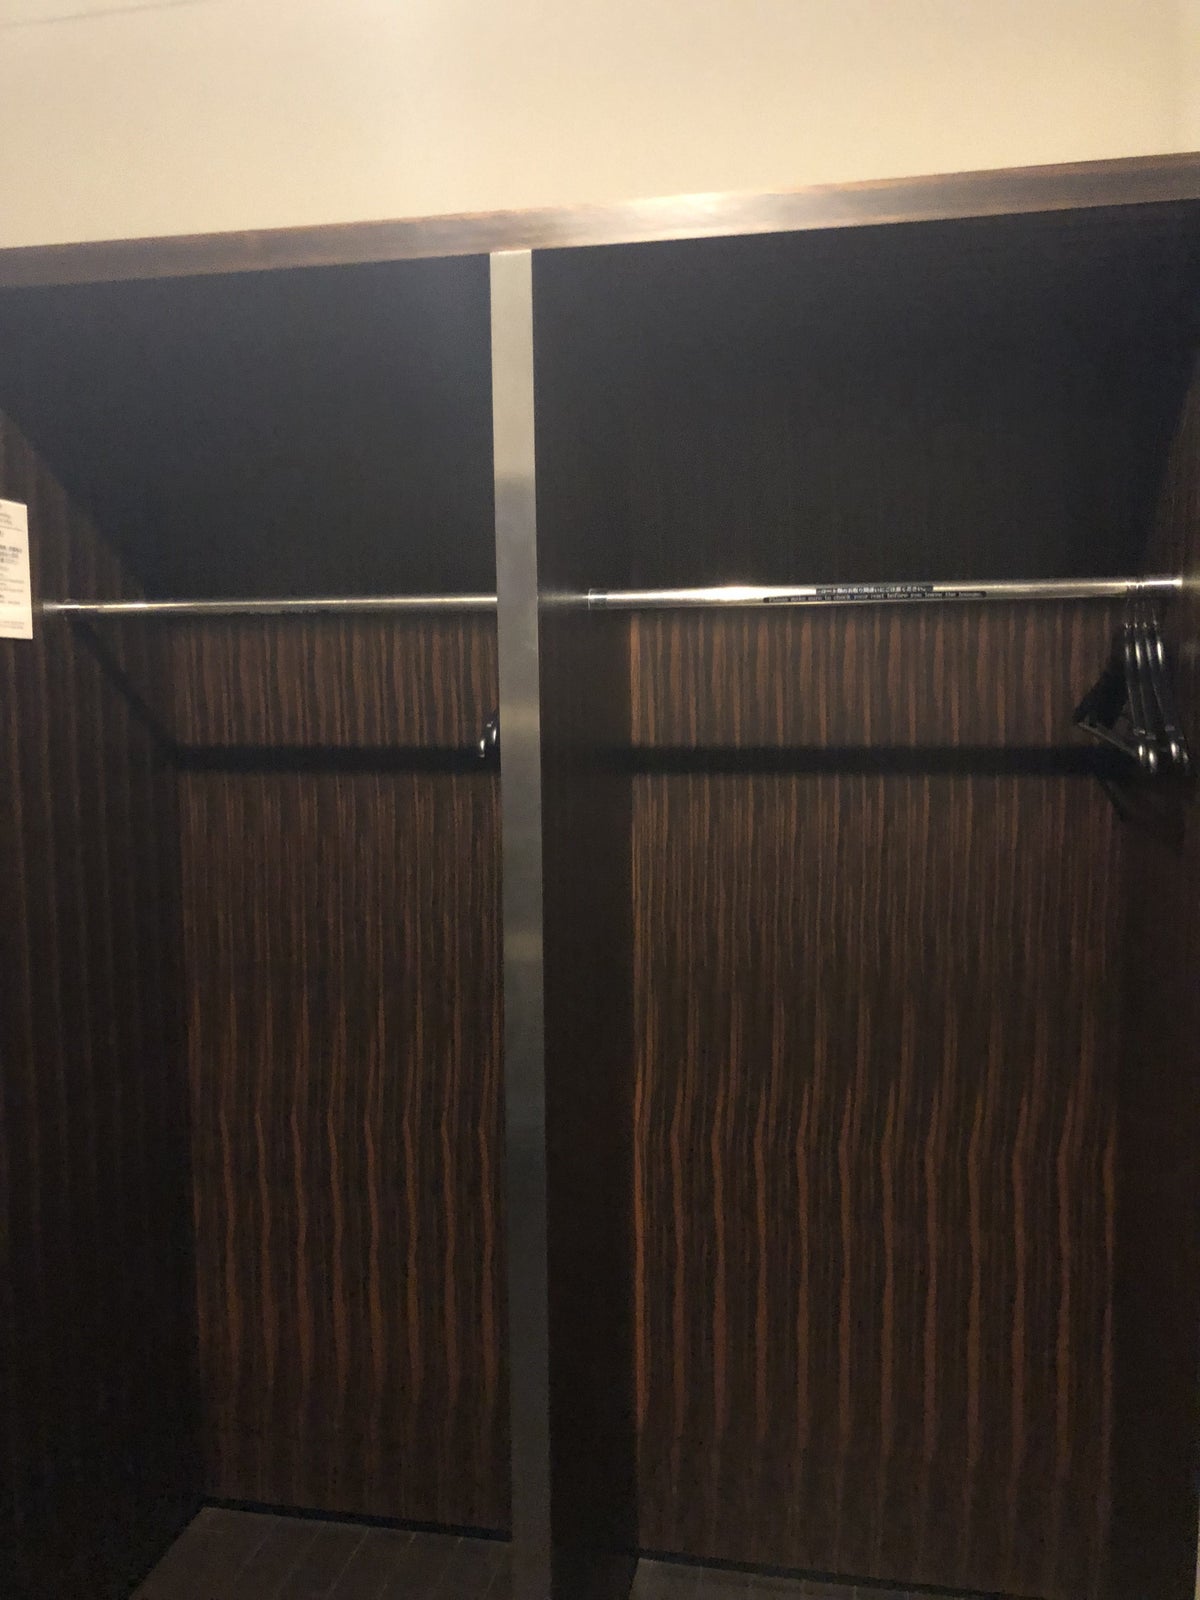 Japan Airlines First Class Lounge Closet Space